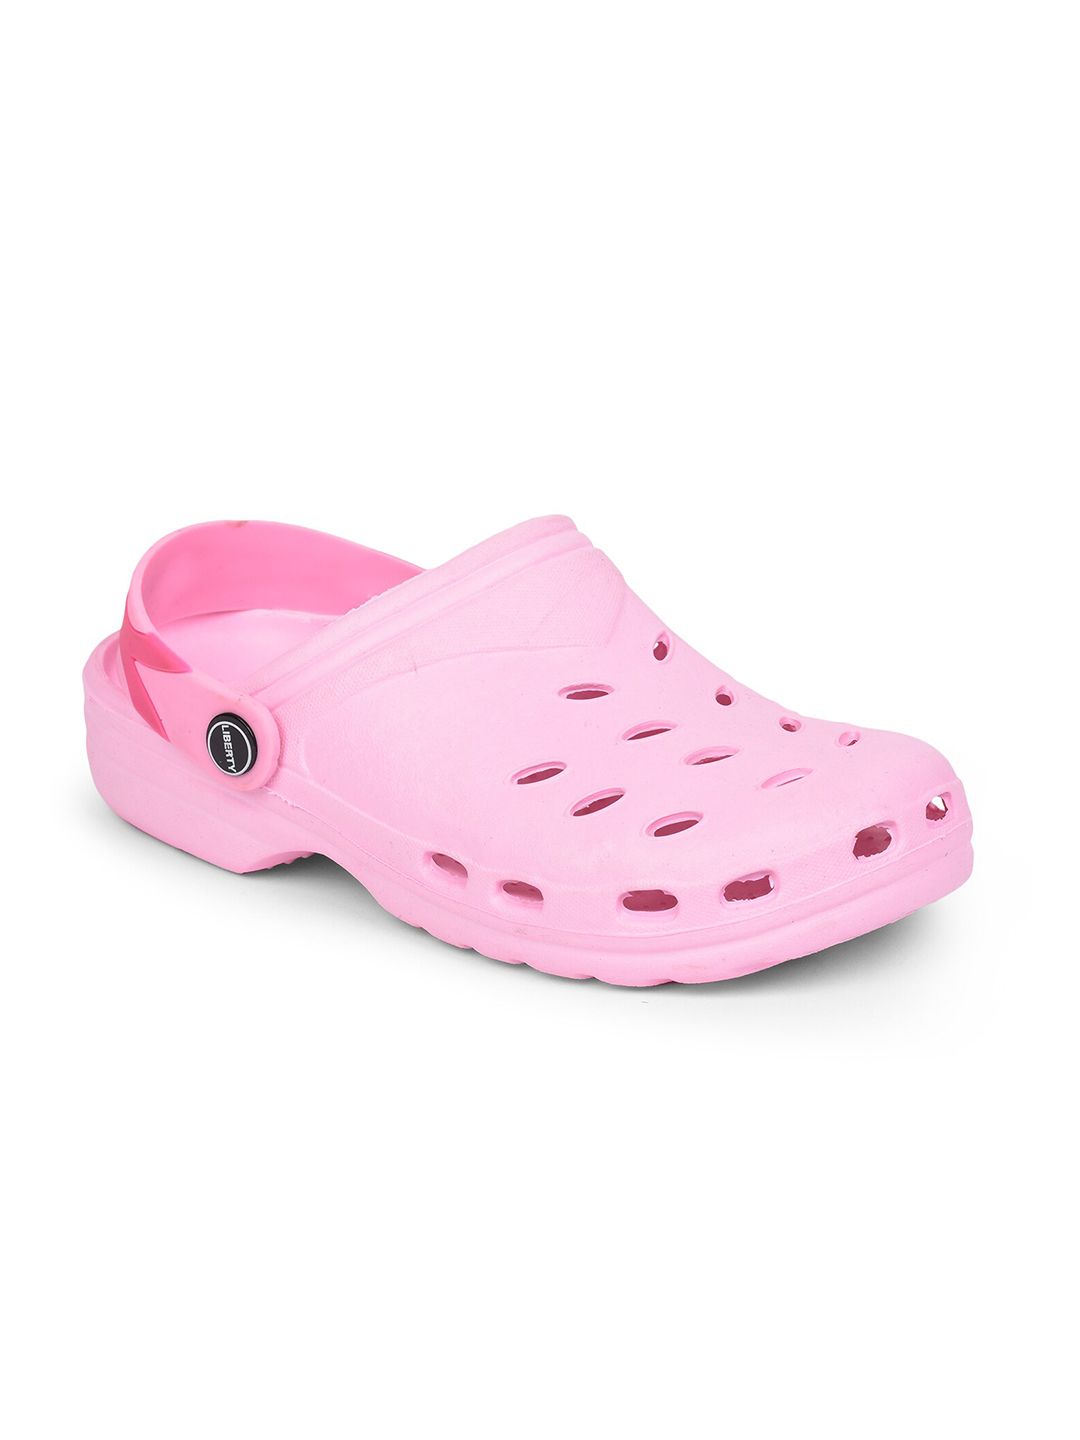 Liberty Women Pink Rubber Clogs Price in India